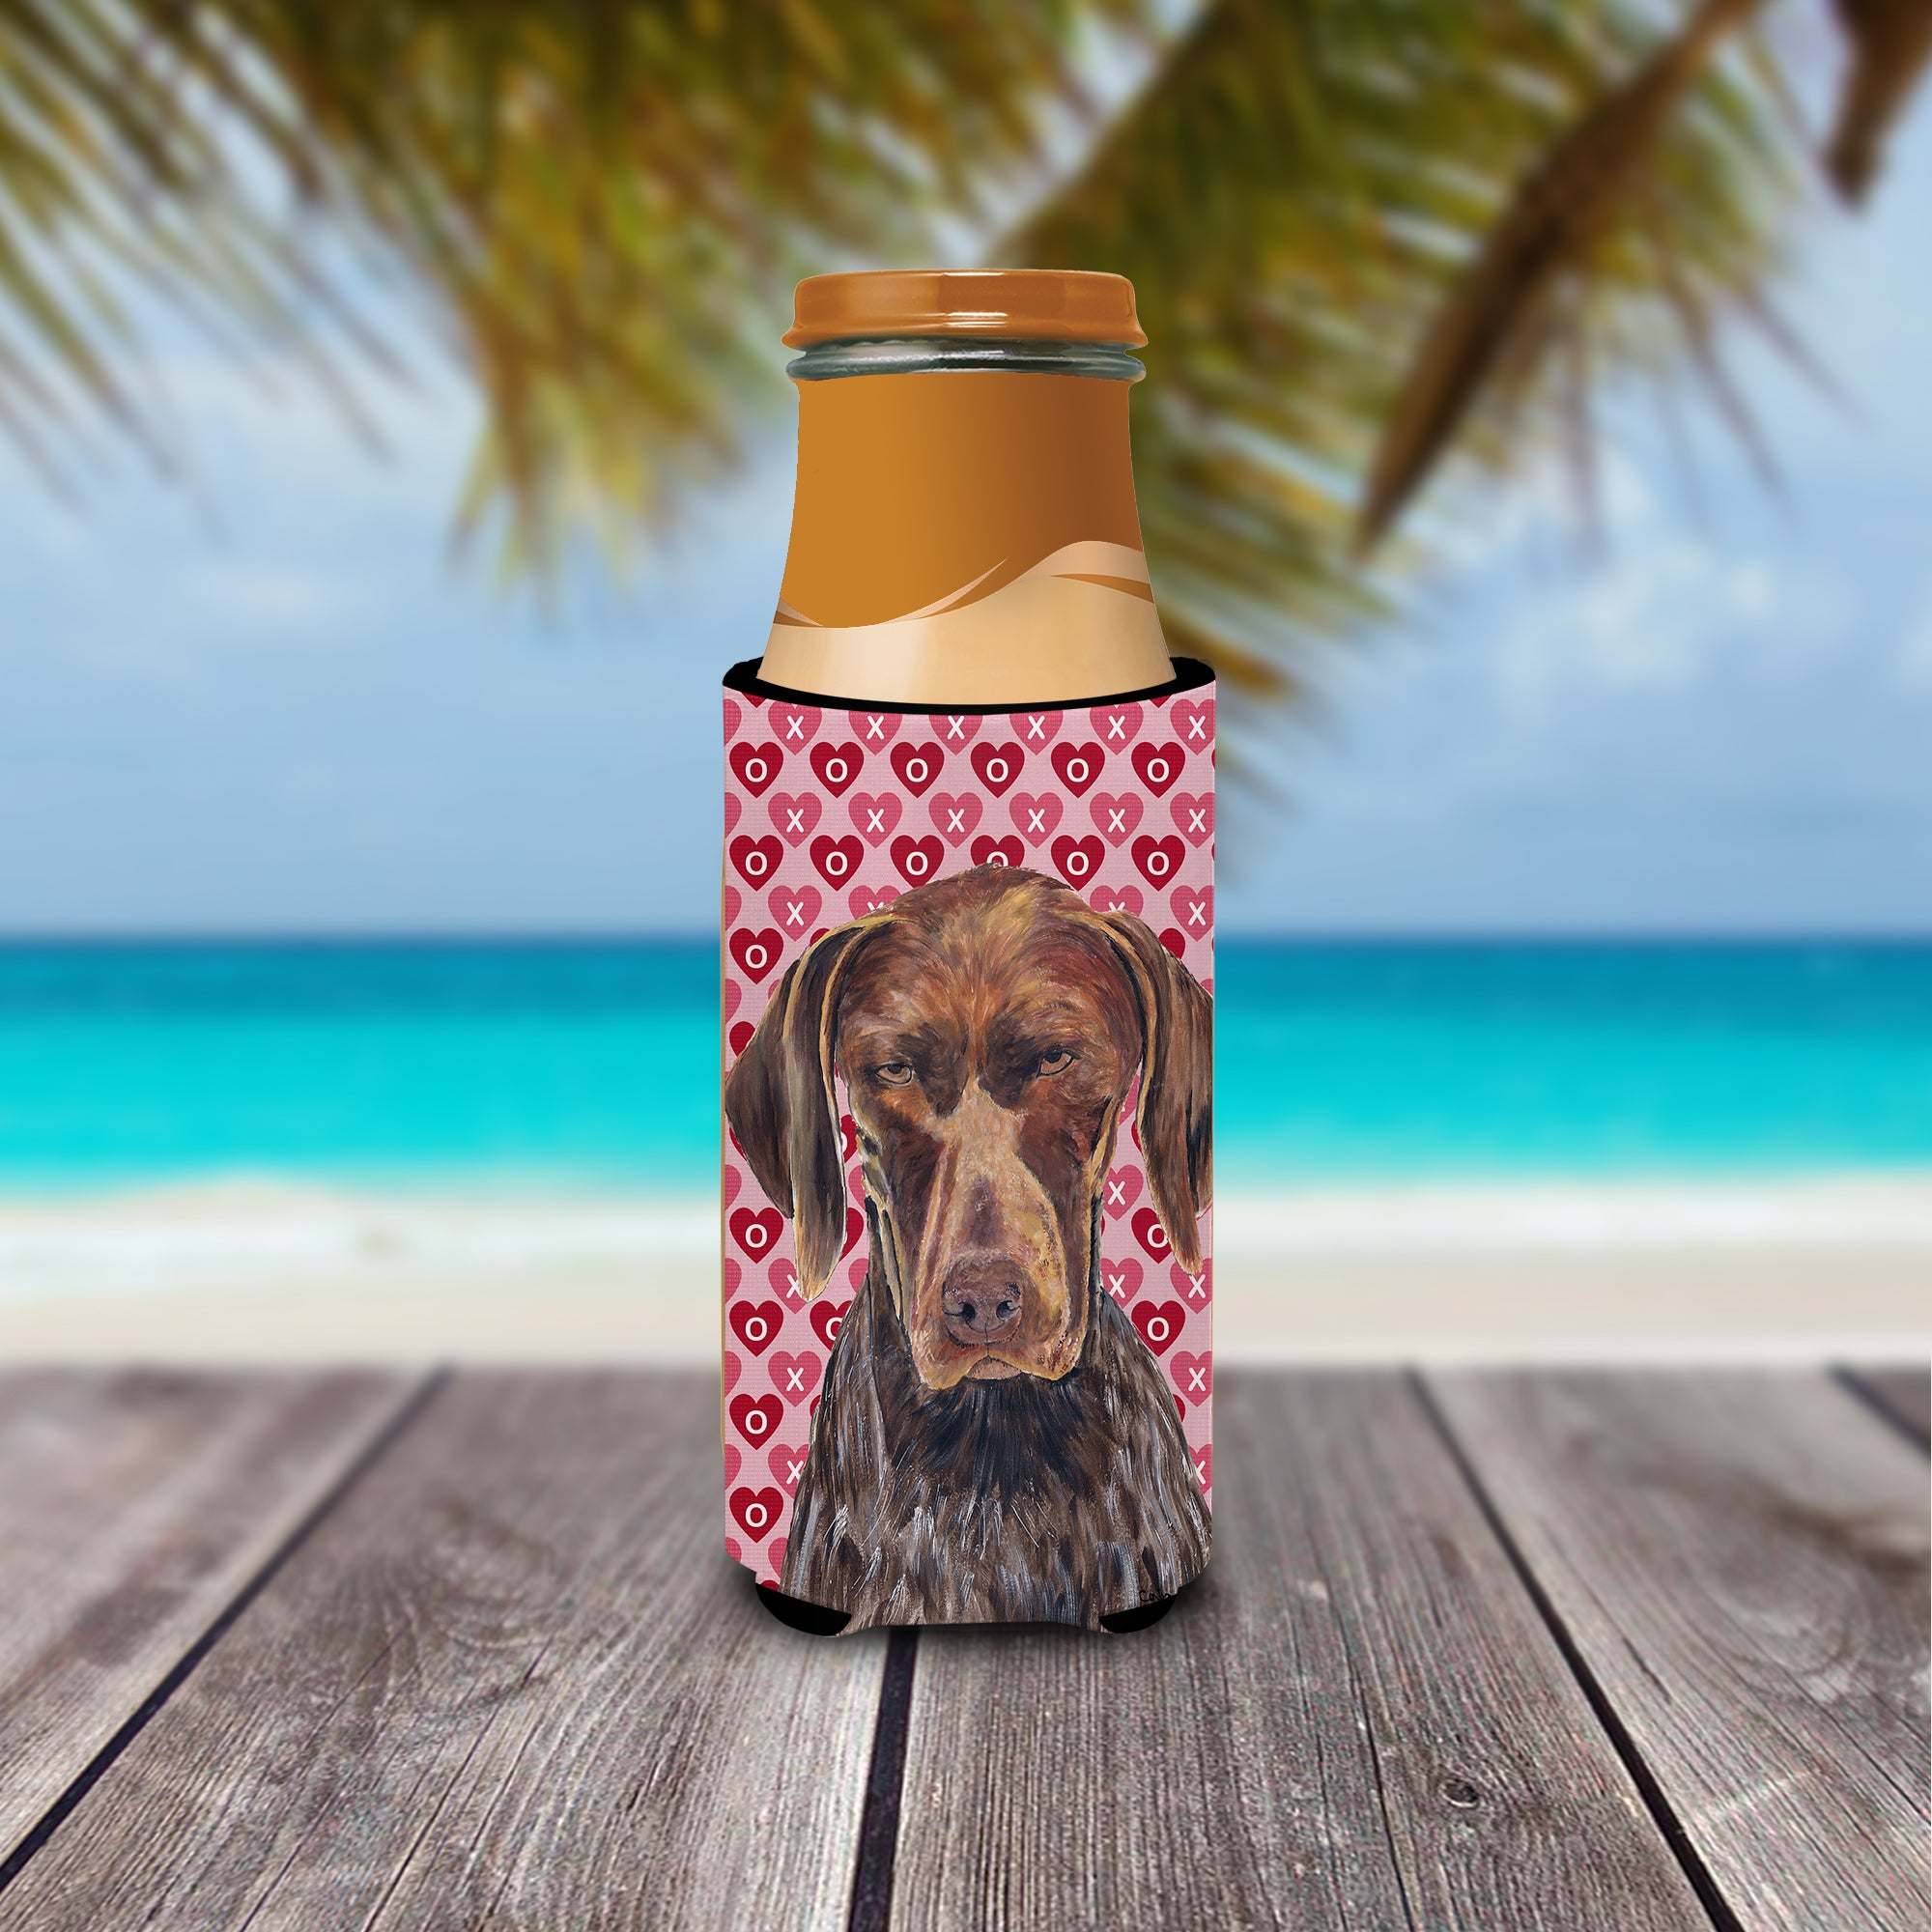 German Shorthaired Pointer Hearts Love and Valentine's Day Ultra Beverage Insulators for slim cans SC9244MUK